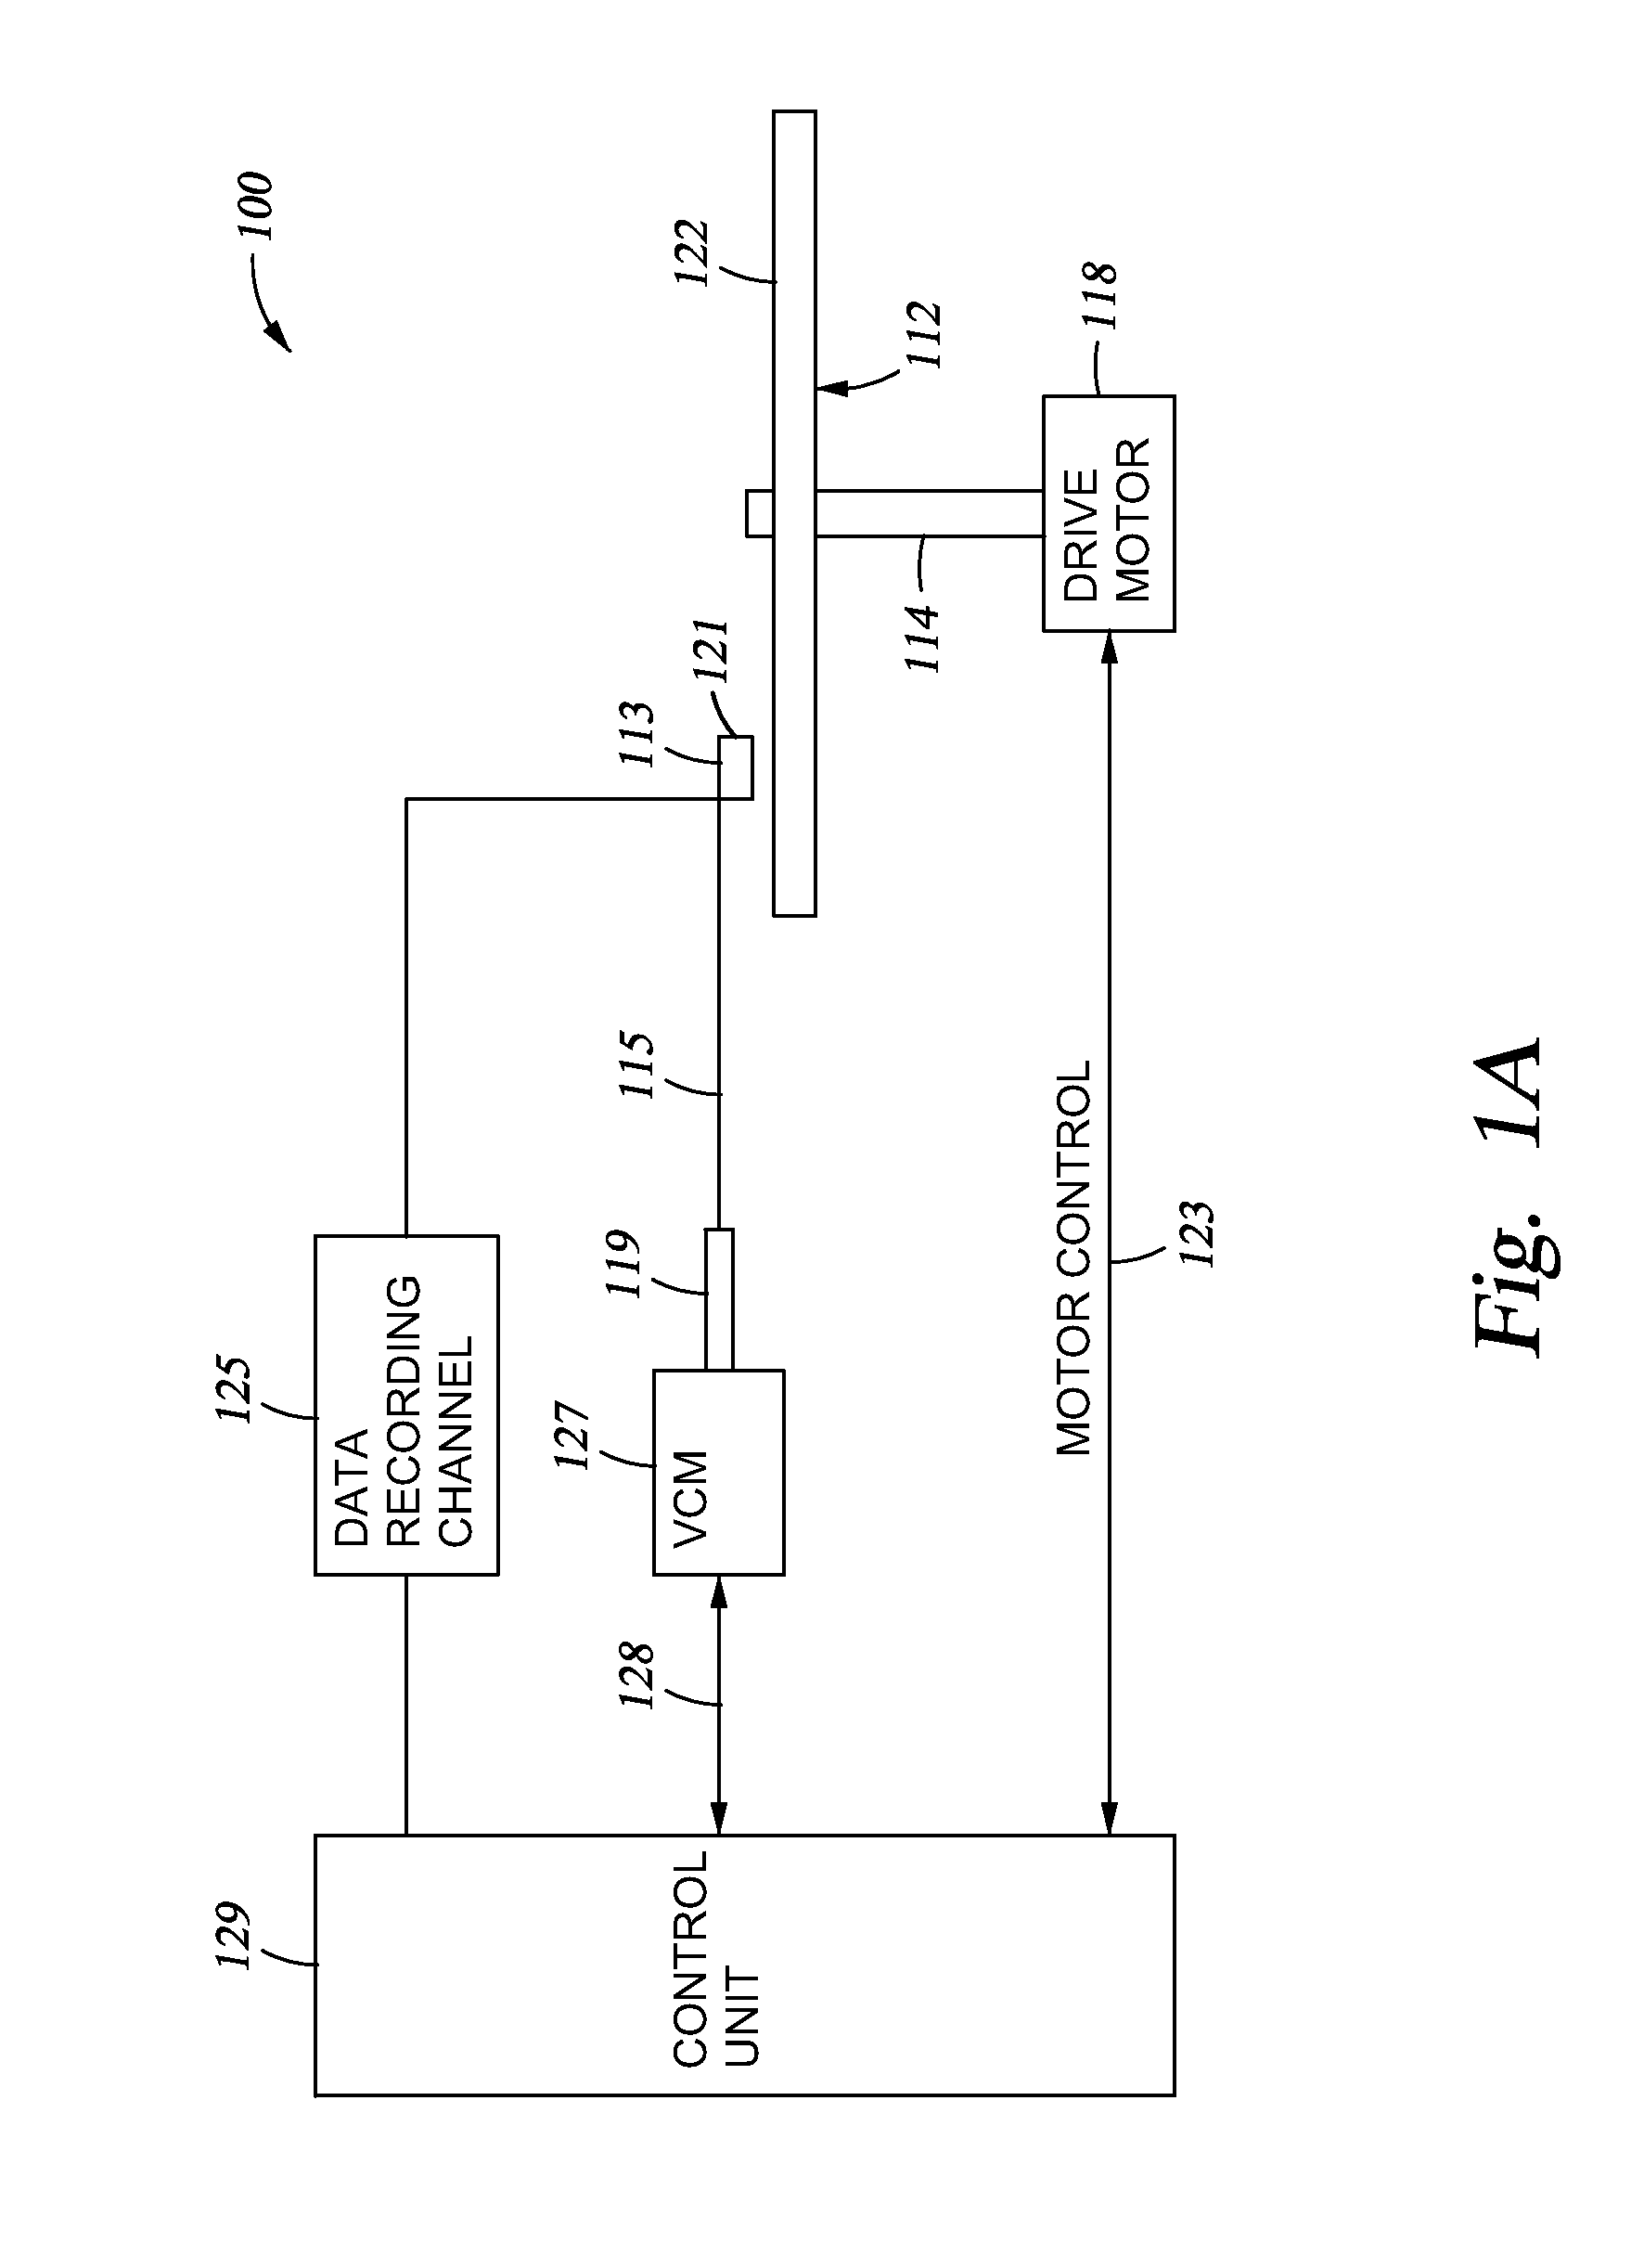 Hamr head spot-size converters with secondary index confinement